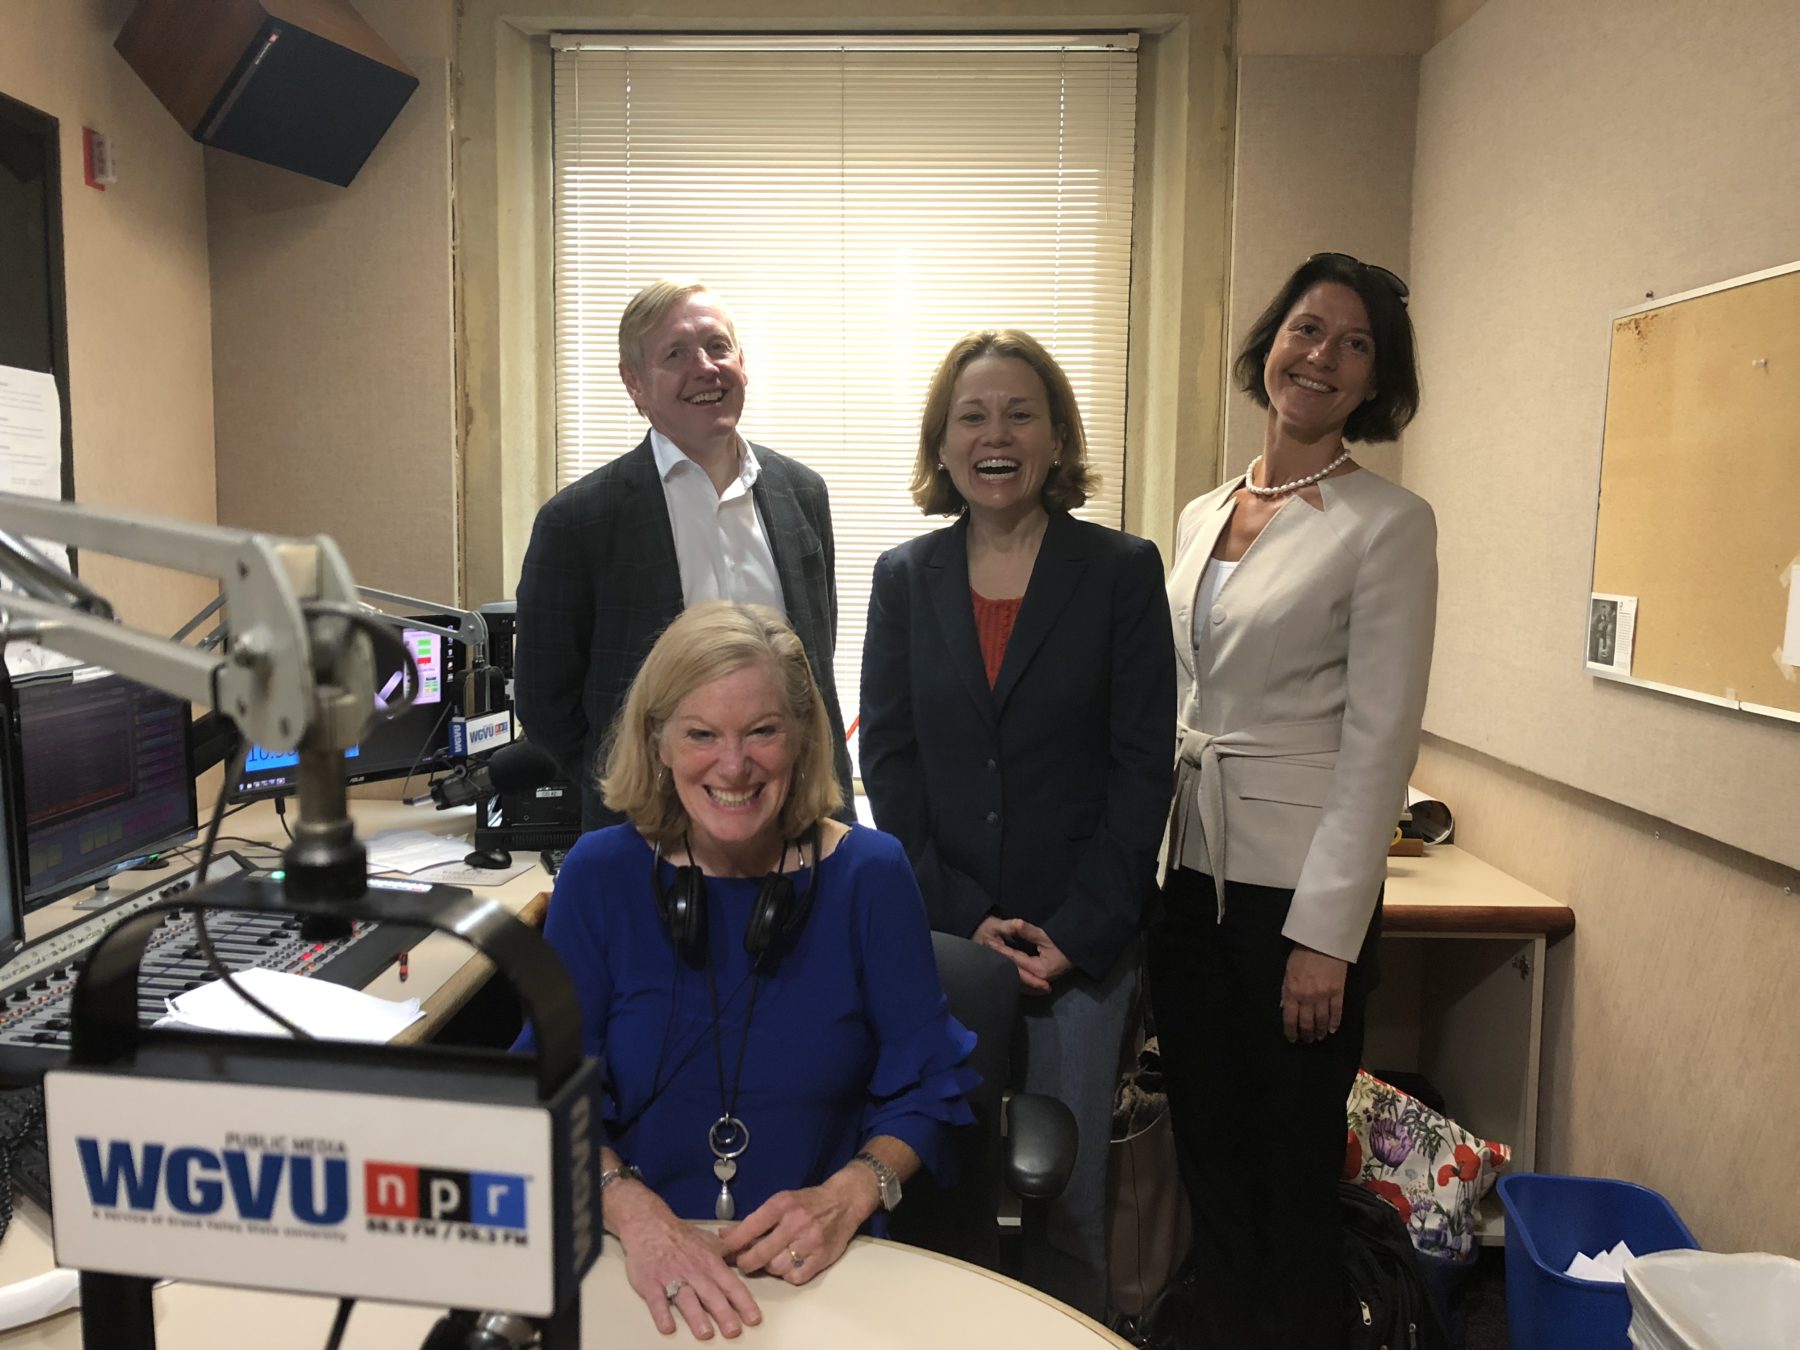 Shelley Irwin, Kadri Liik, Amb. Aas, and Julie Smith after a delightful morning radio interview